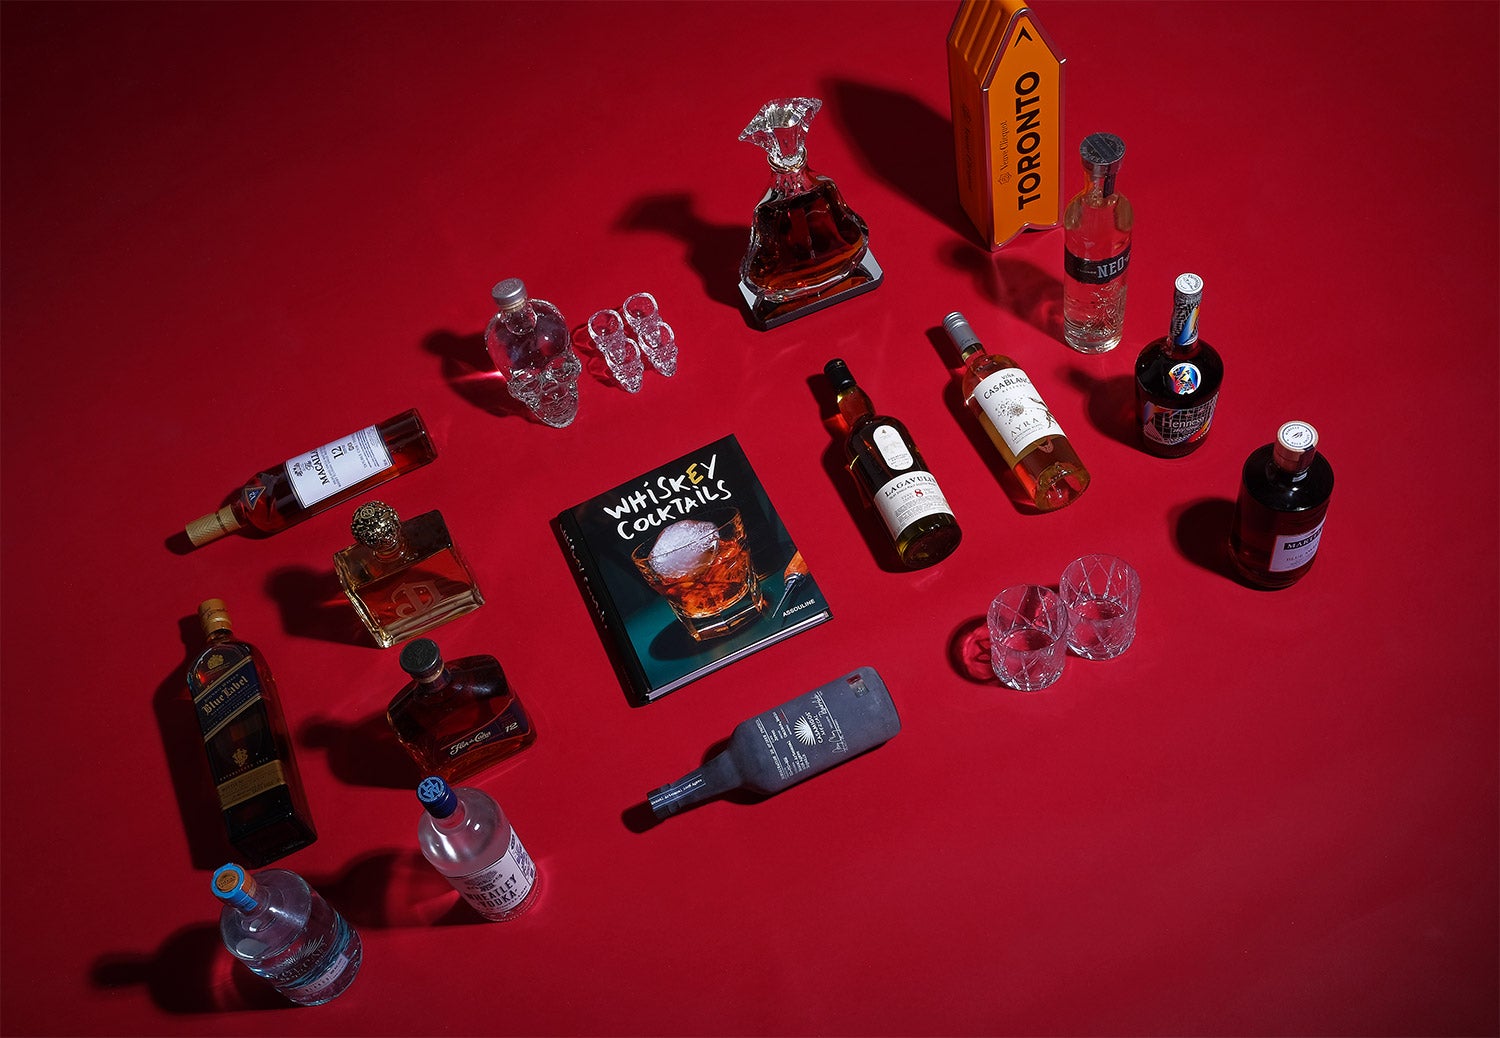 https://www.swaggermagazine.com/home/wp-content/uploads/2019/12/swagger-alcohol-gift-guide.jpg